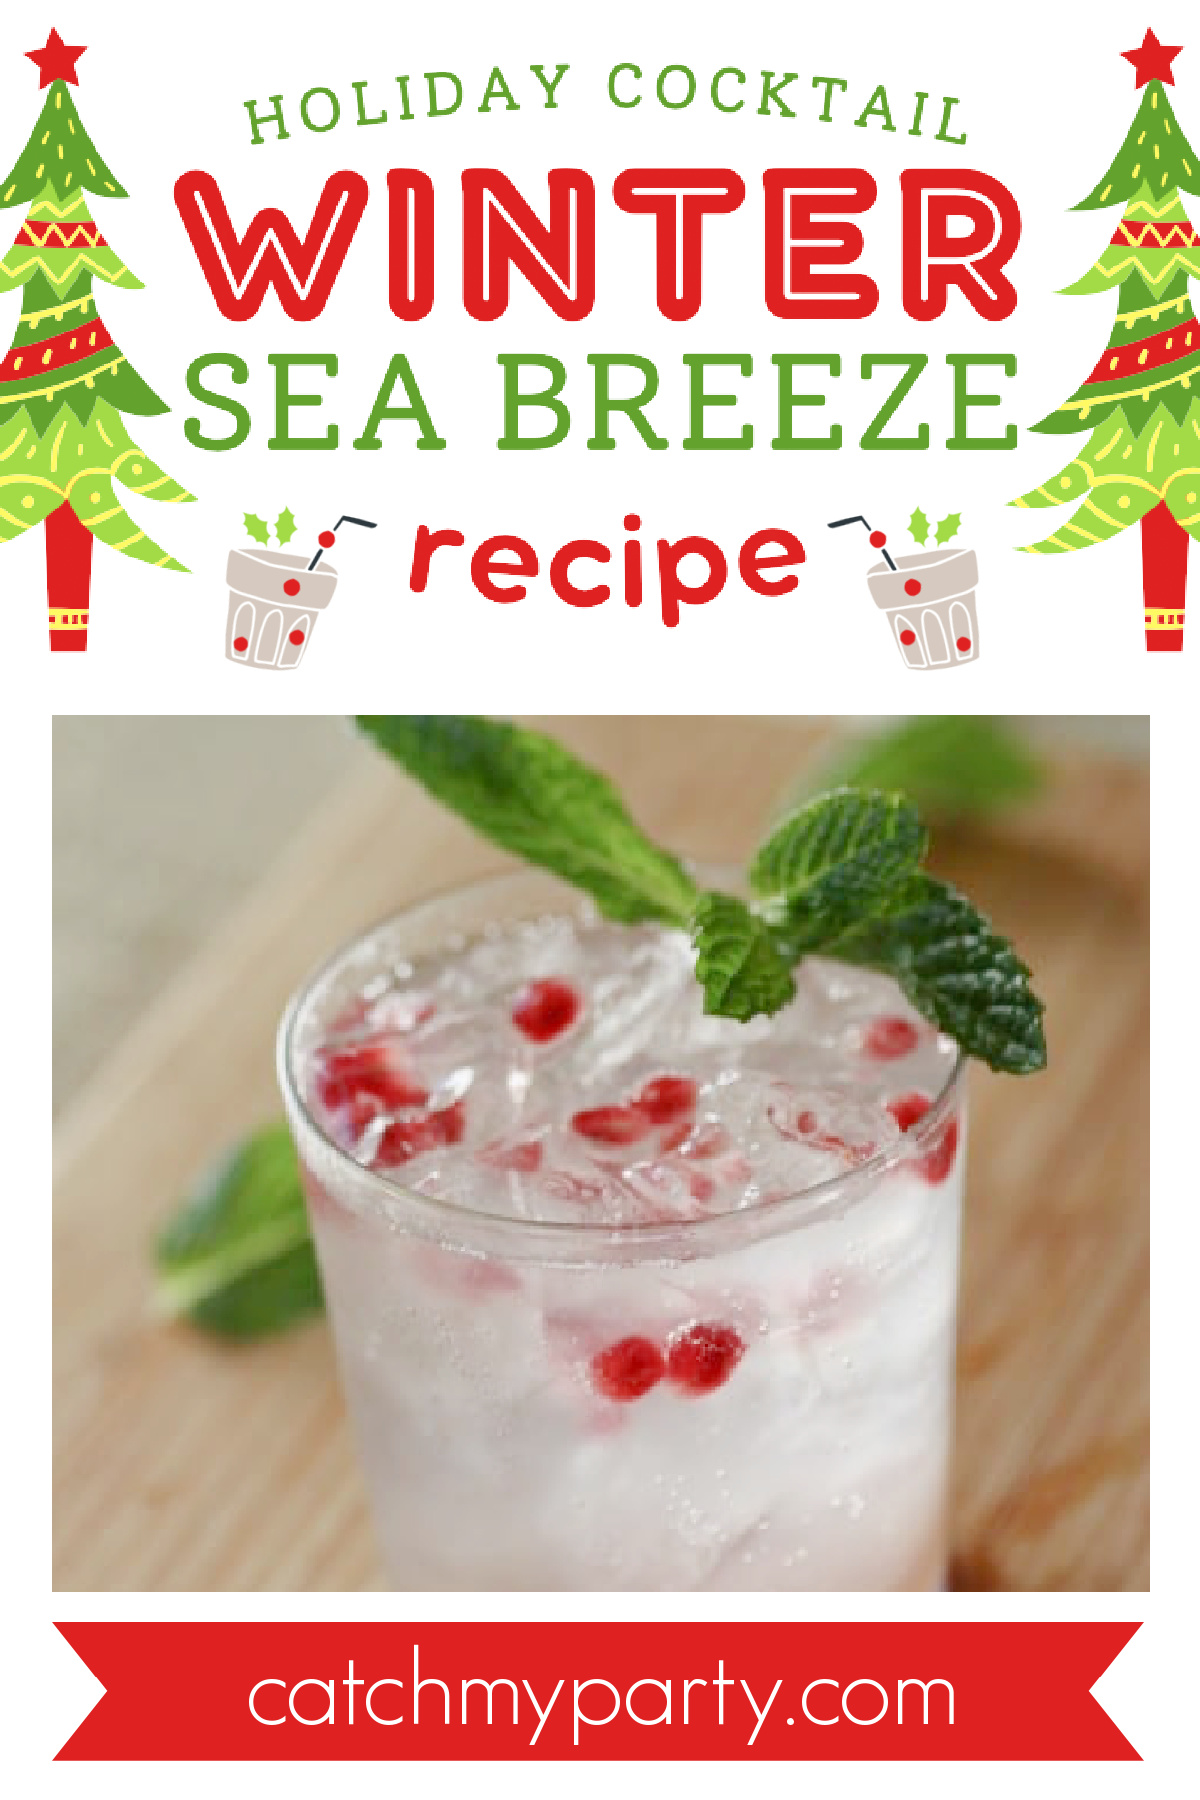 Make a Winter Sea Breeze Holiday Cocktail Now!